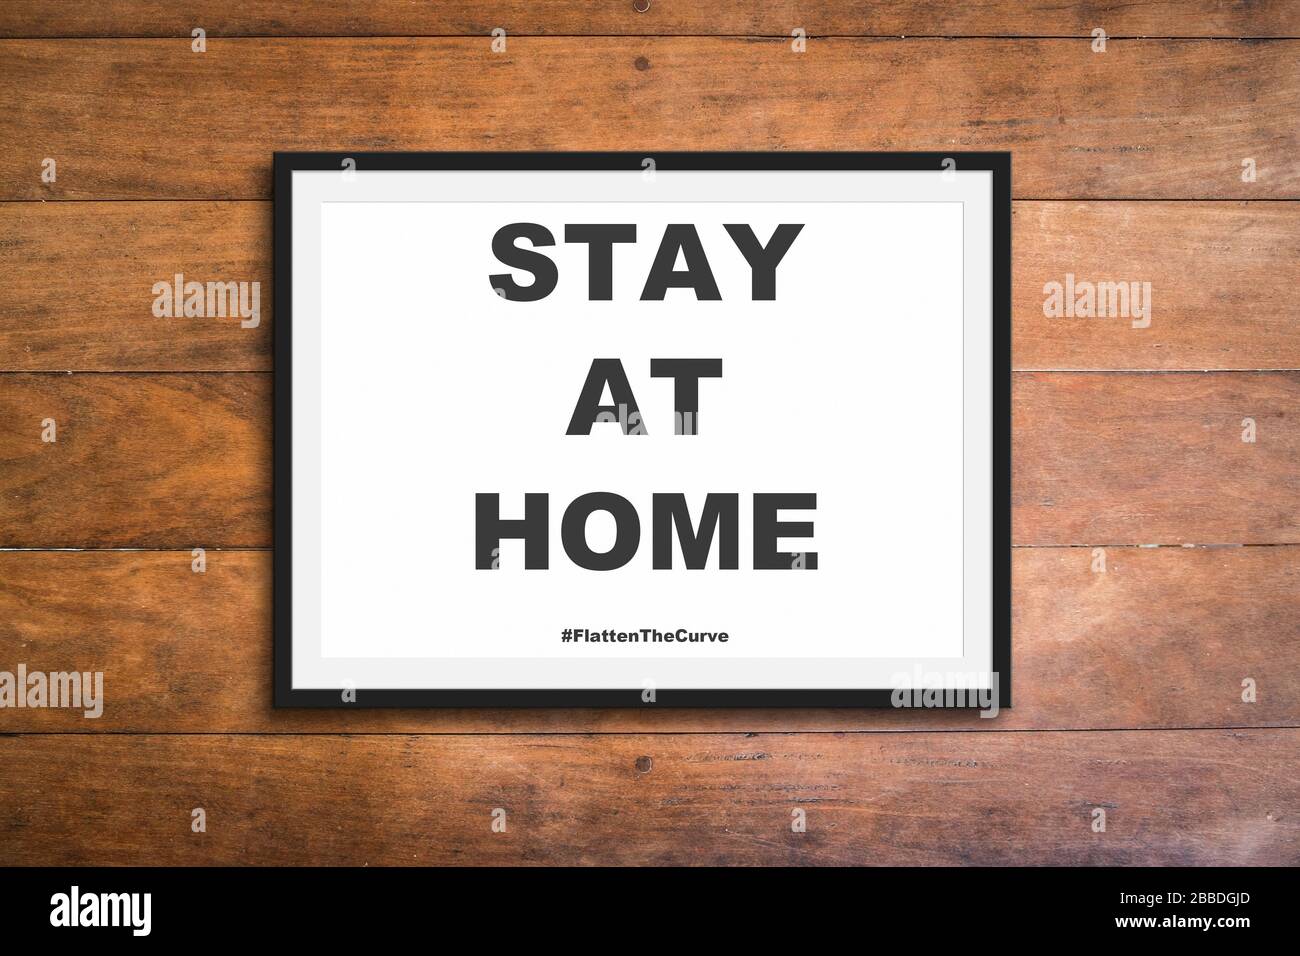 stay at home flatten the curve sign - Corona Virus Stock Photo